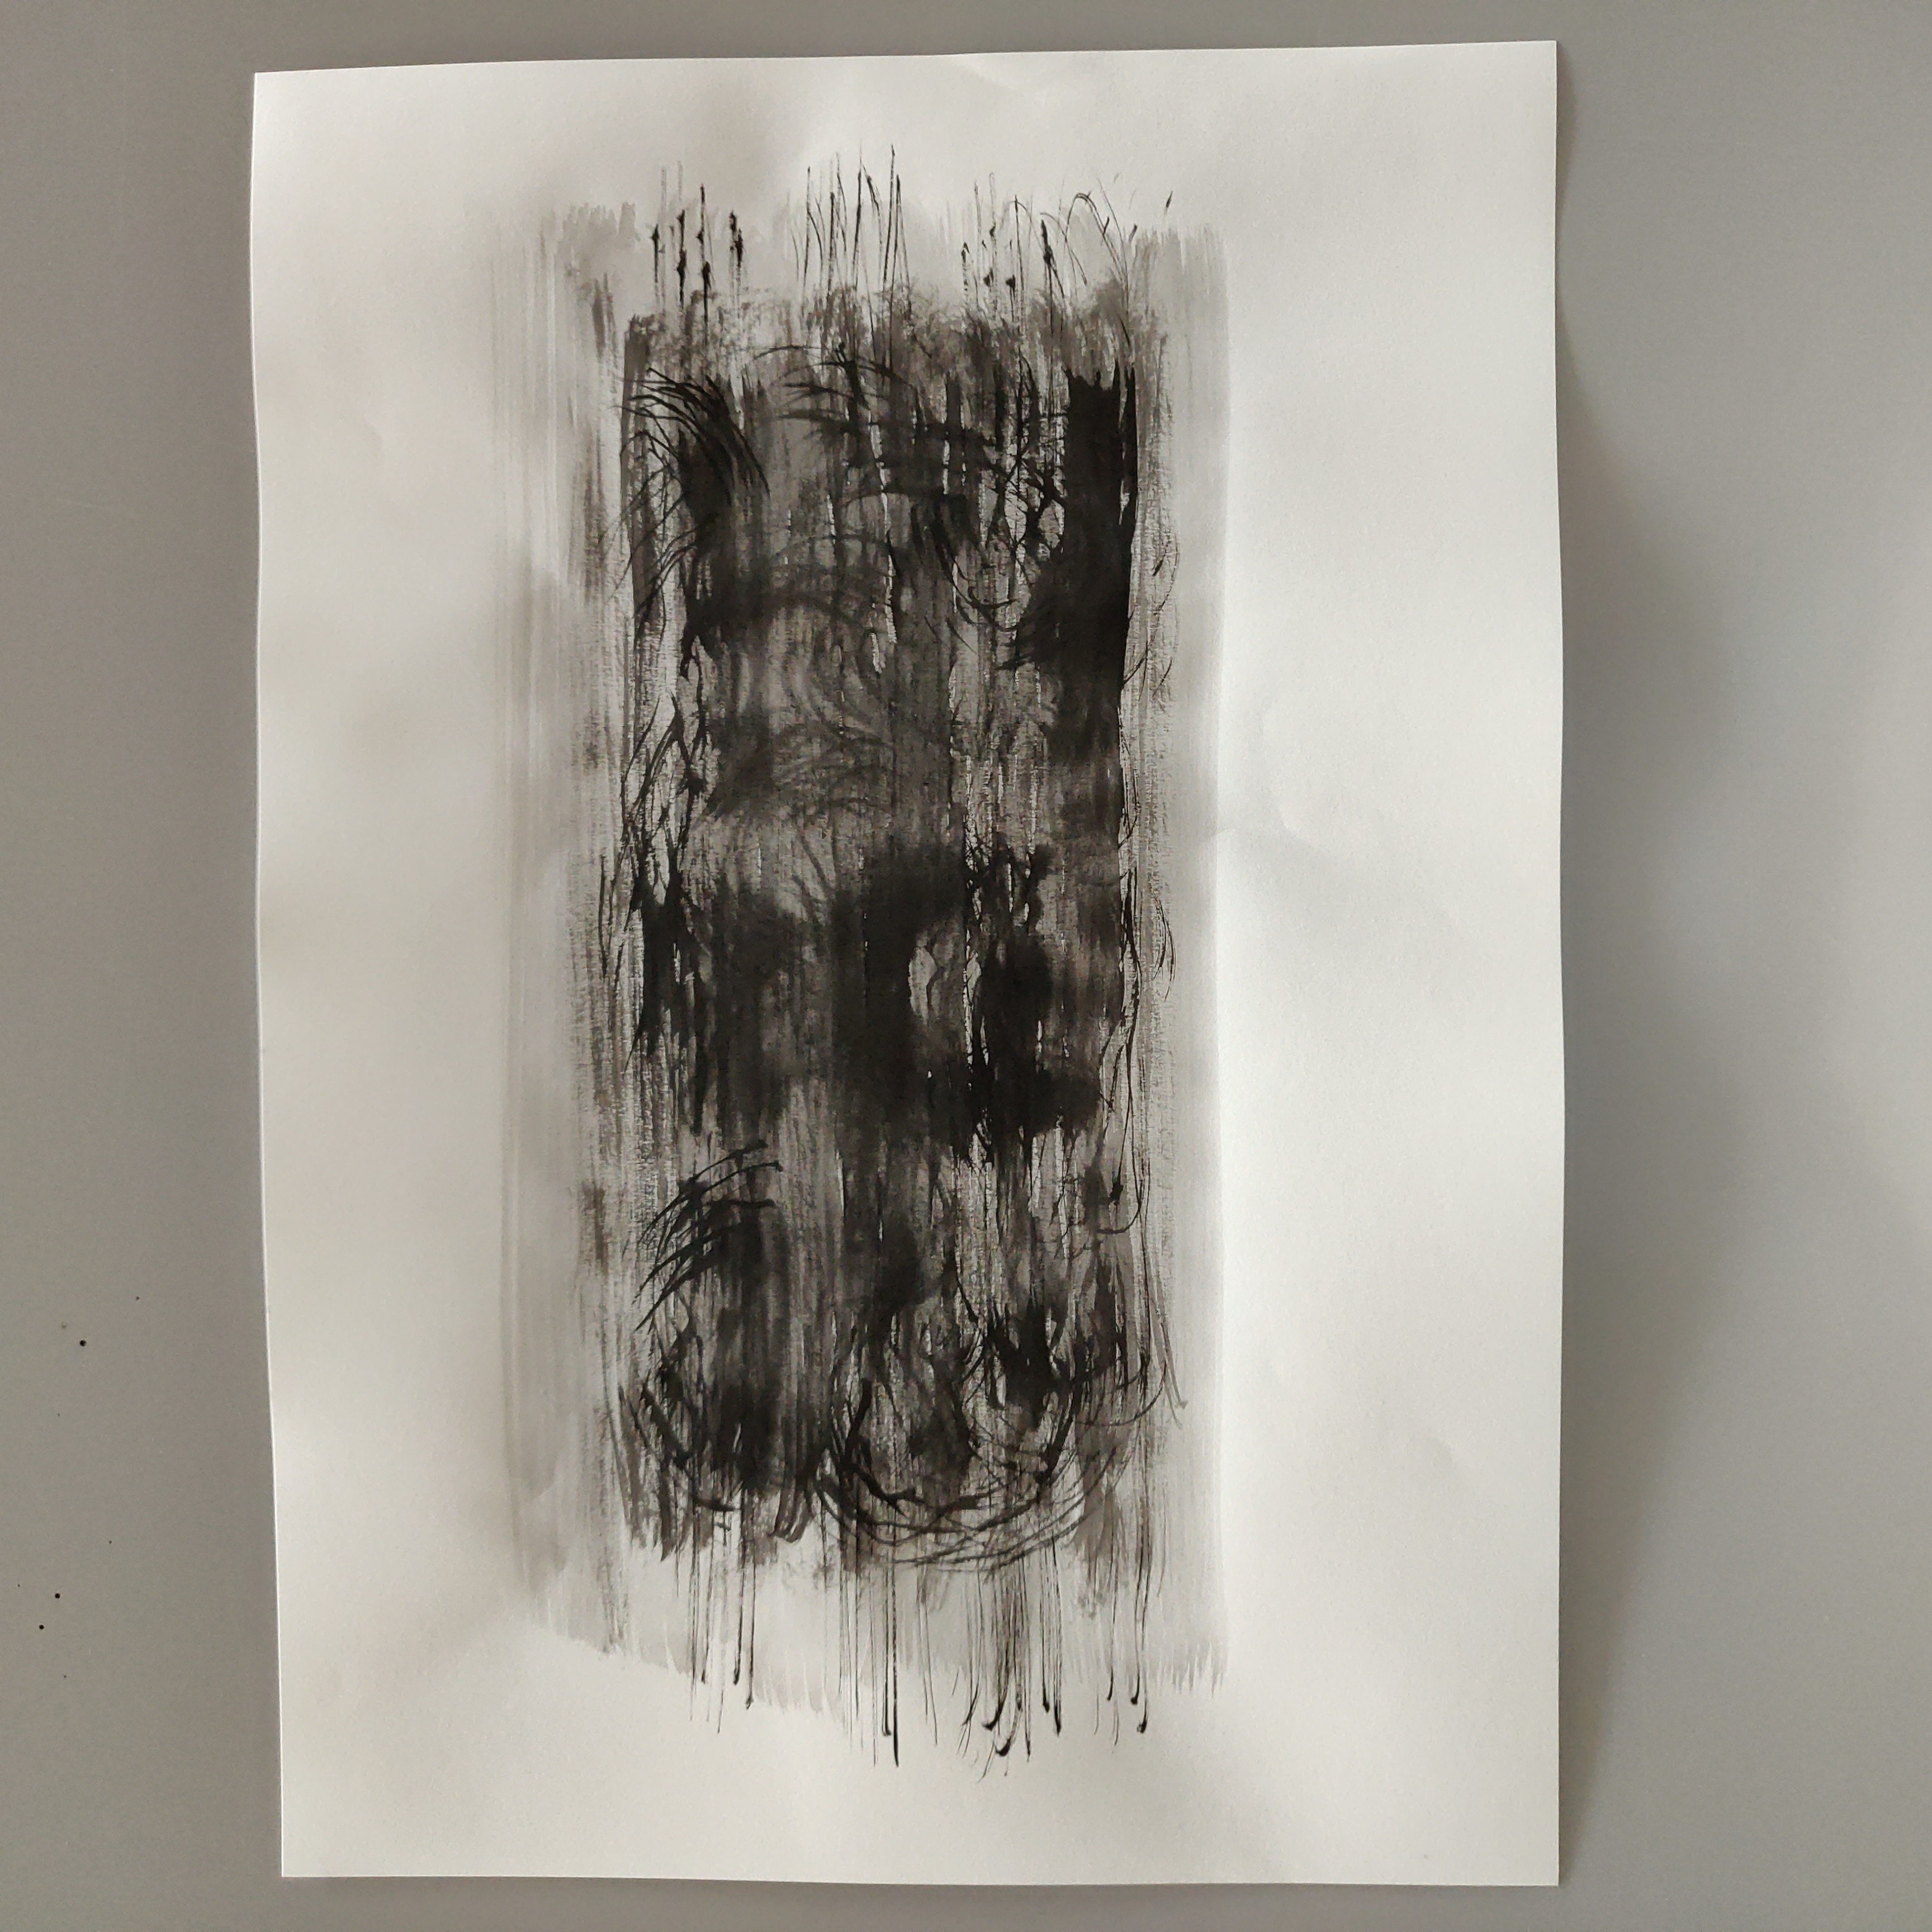 photograph of an abstract drawing, black ink on paper, light areas of grey surrounding a darker central area that runs from grey to black, swirls of ink within